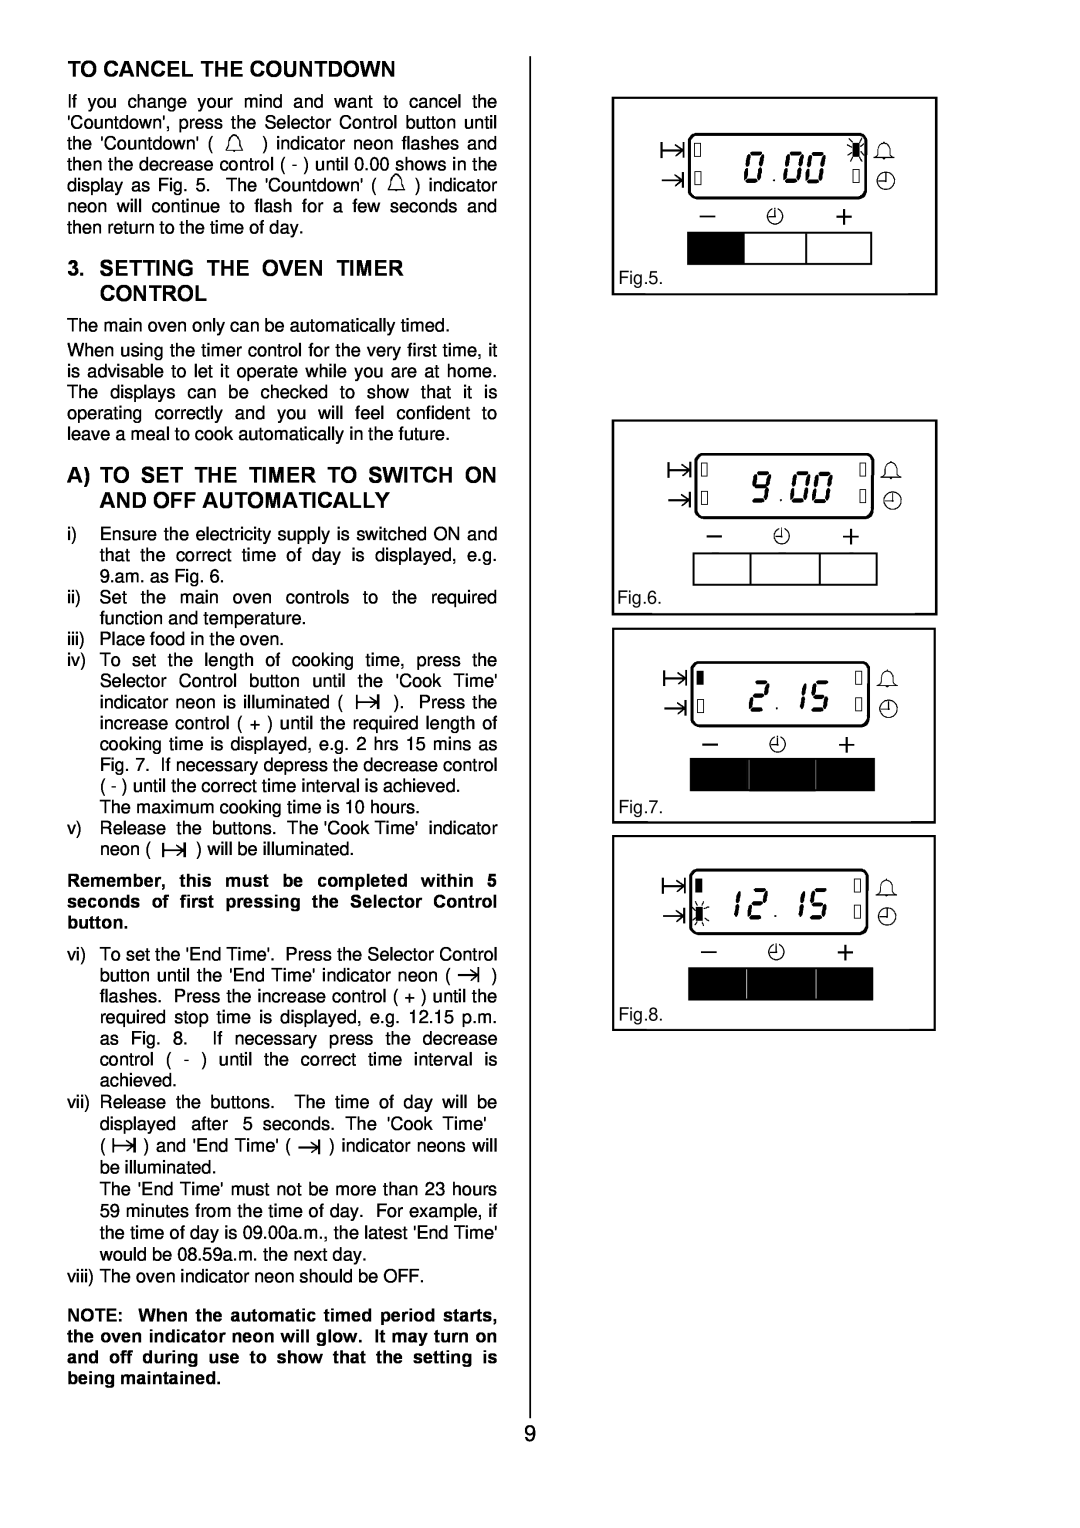 Electrolux D4101-5 manual To Cancel The Countdown, Setting The Oven Timer Control 